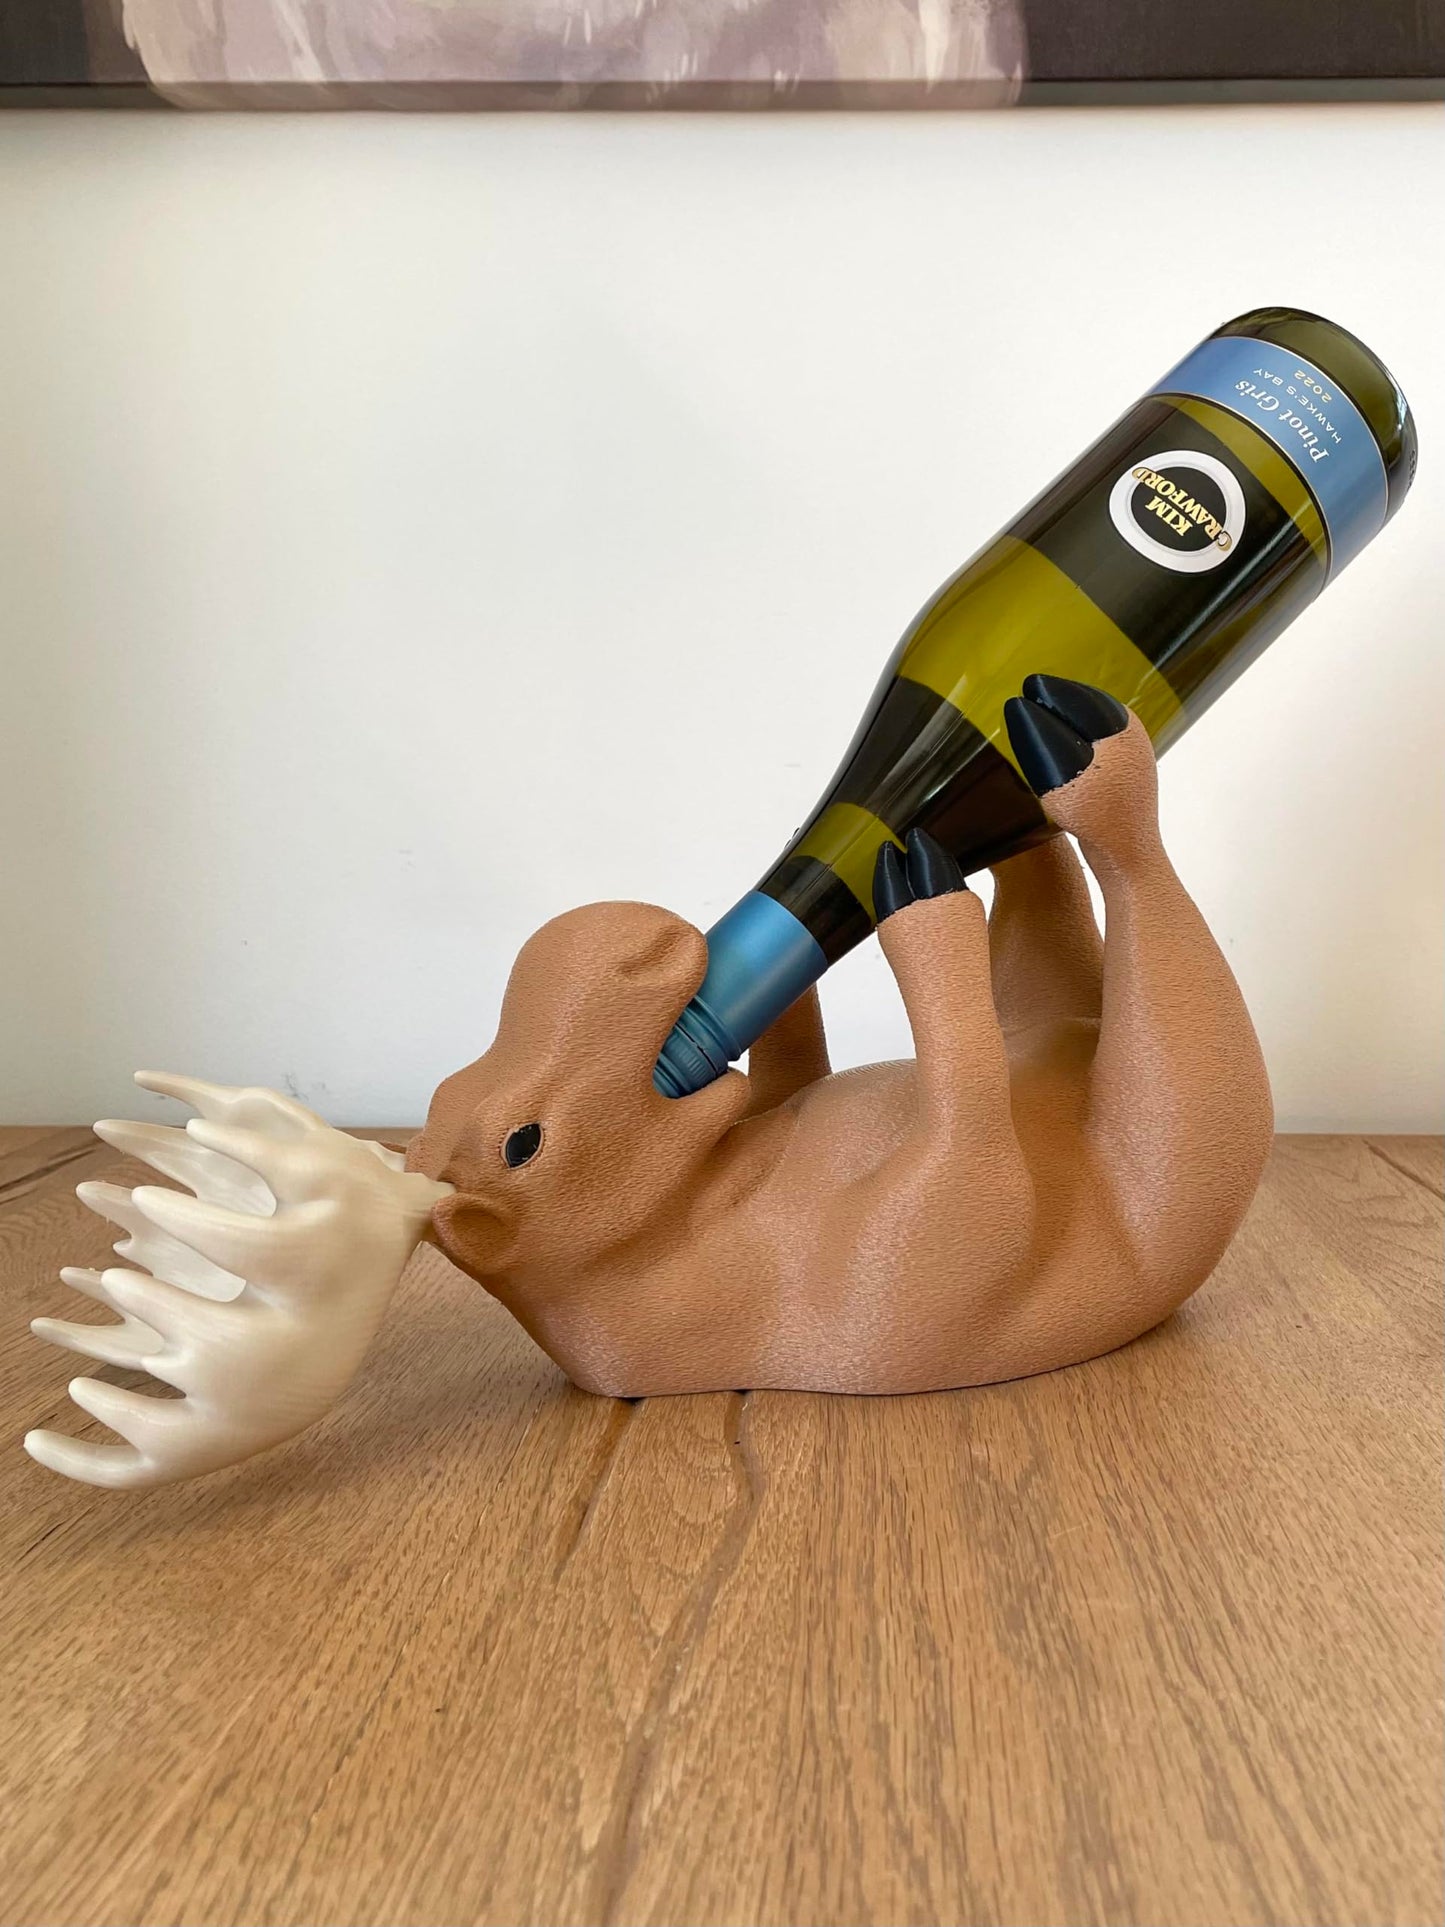 GoodBuy.ai's Tipsy Moose Wine Cradle 3D Printed Moose Wine Bottle Holder - Quirky Home Decor - GoodBuy.ai